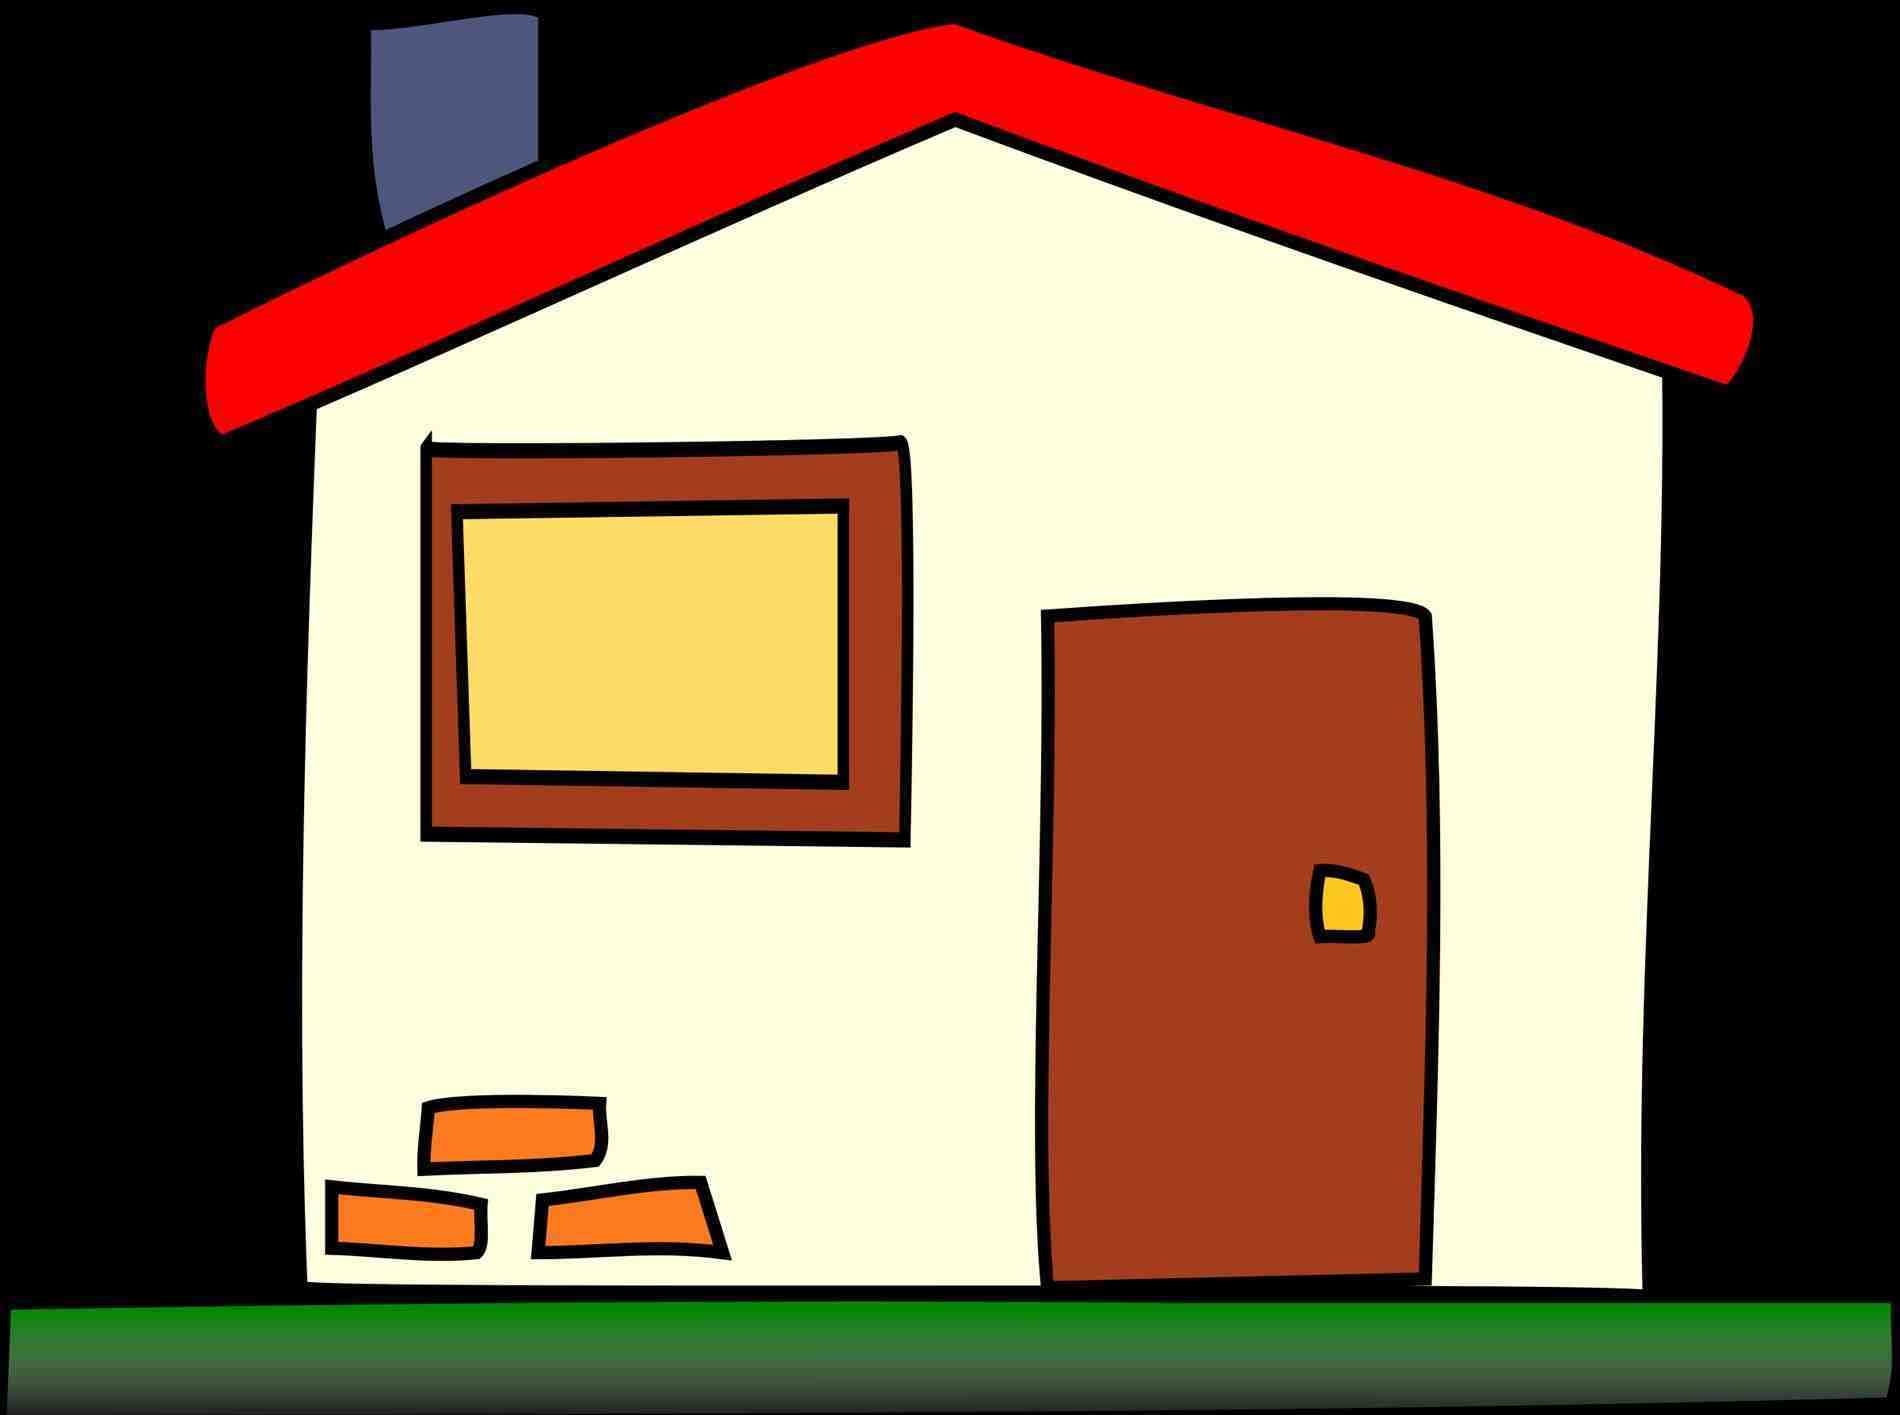 Cliparts free download clip. Adobe clipart house india